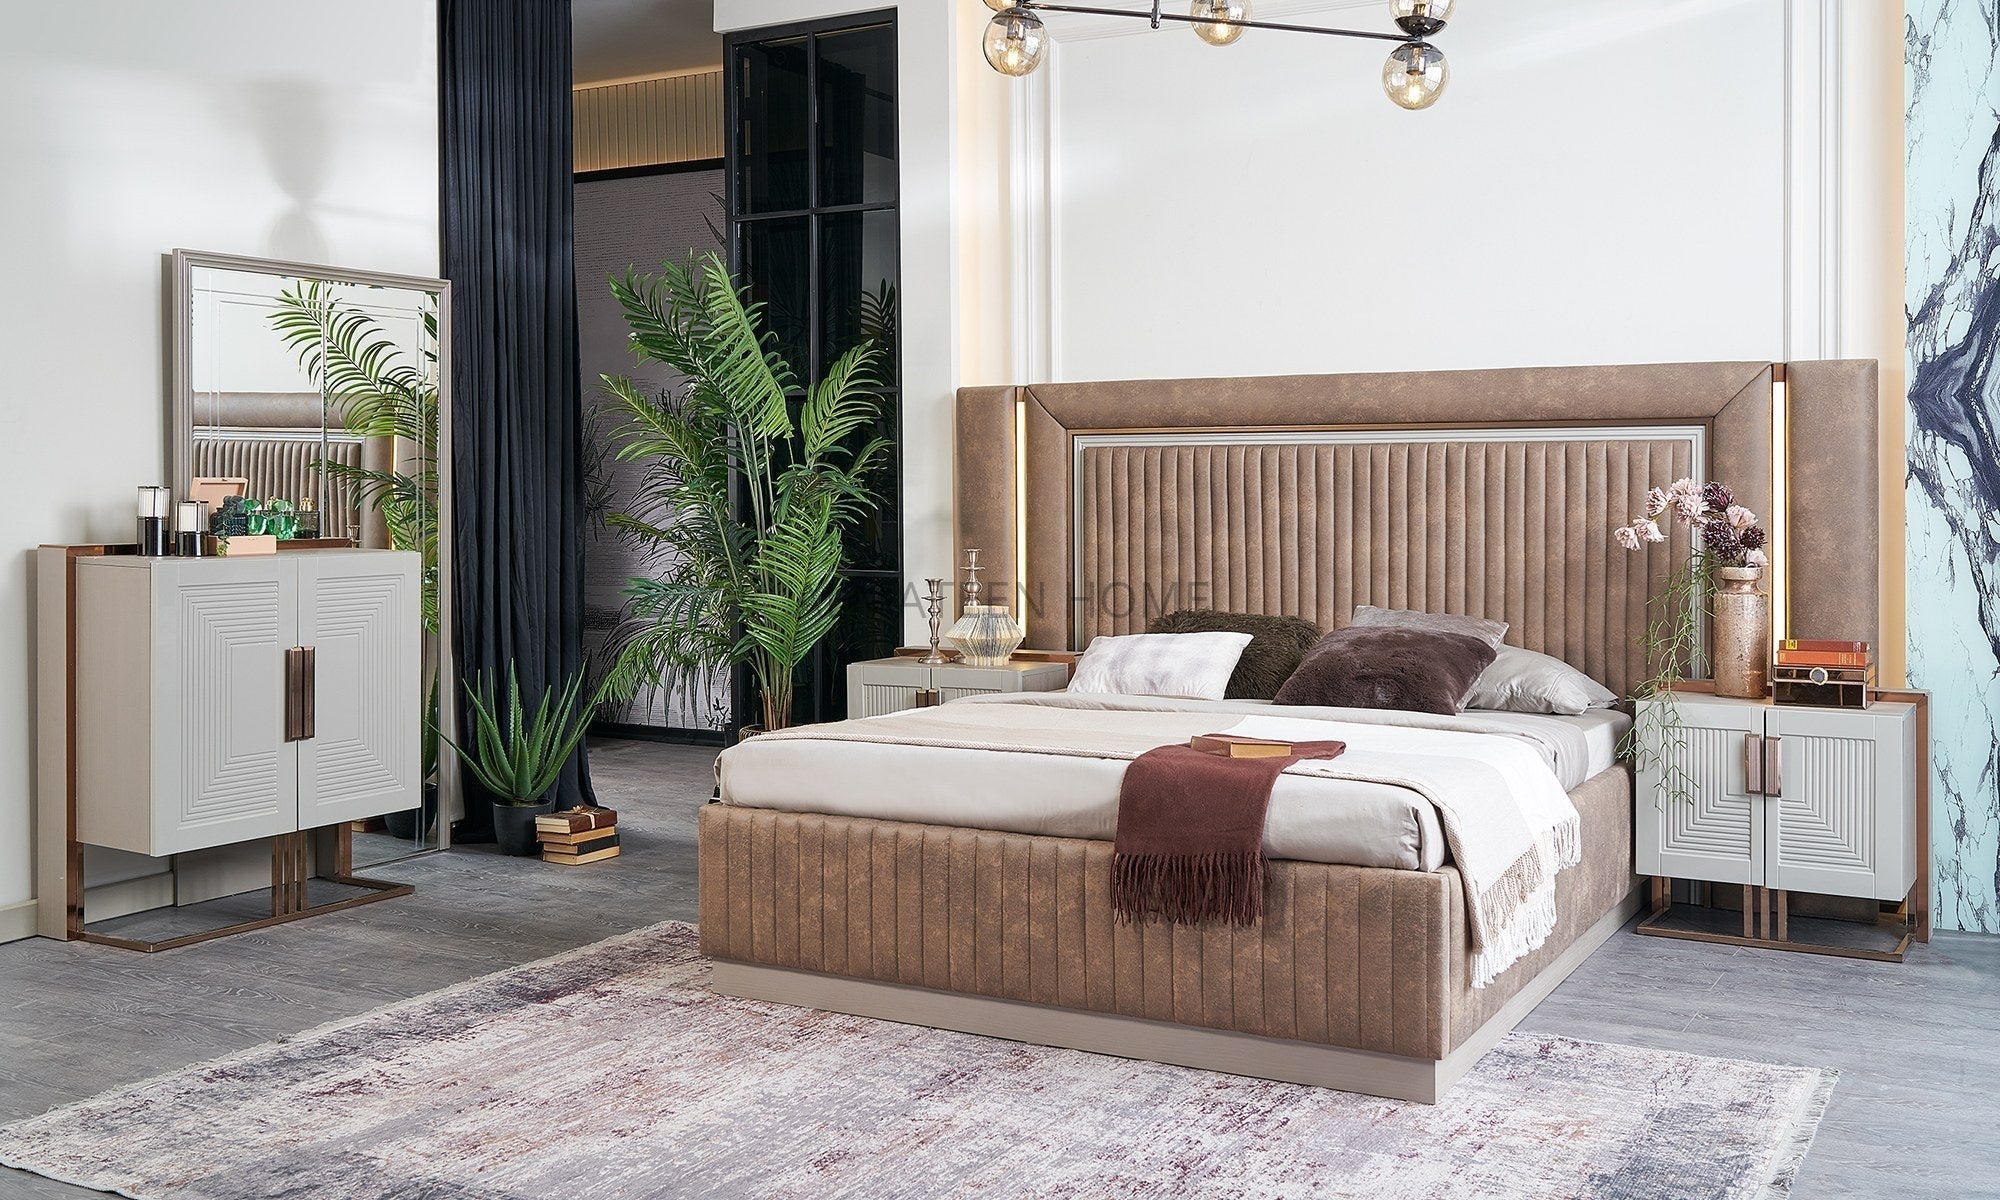 turkish-moon-bedroom-set-with-king-size-bed-dresser-wardrobe-and-side-tables-2- AL-Mateen Home